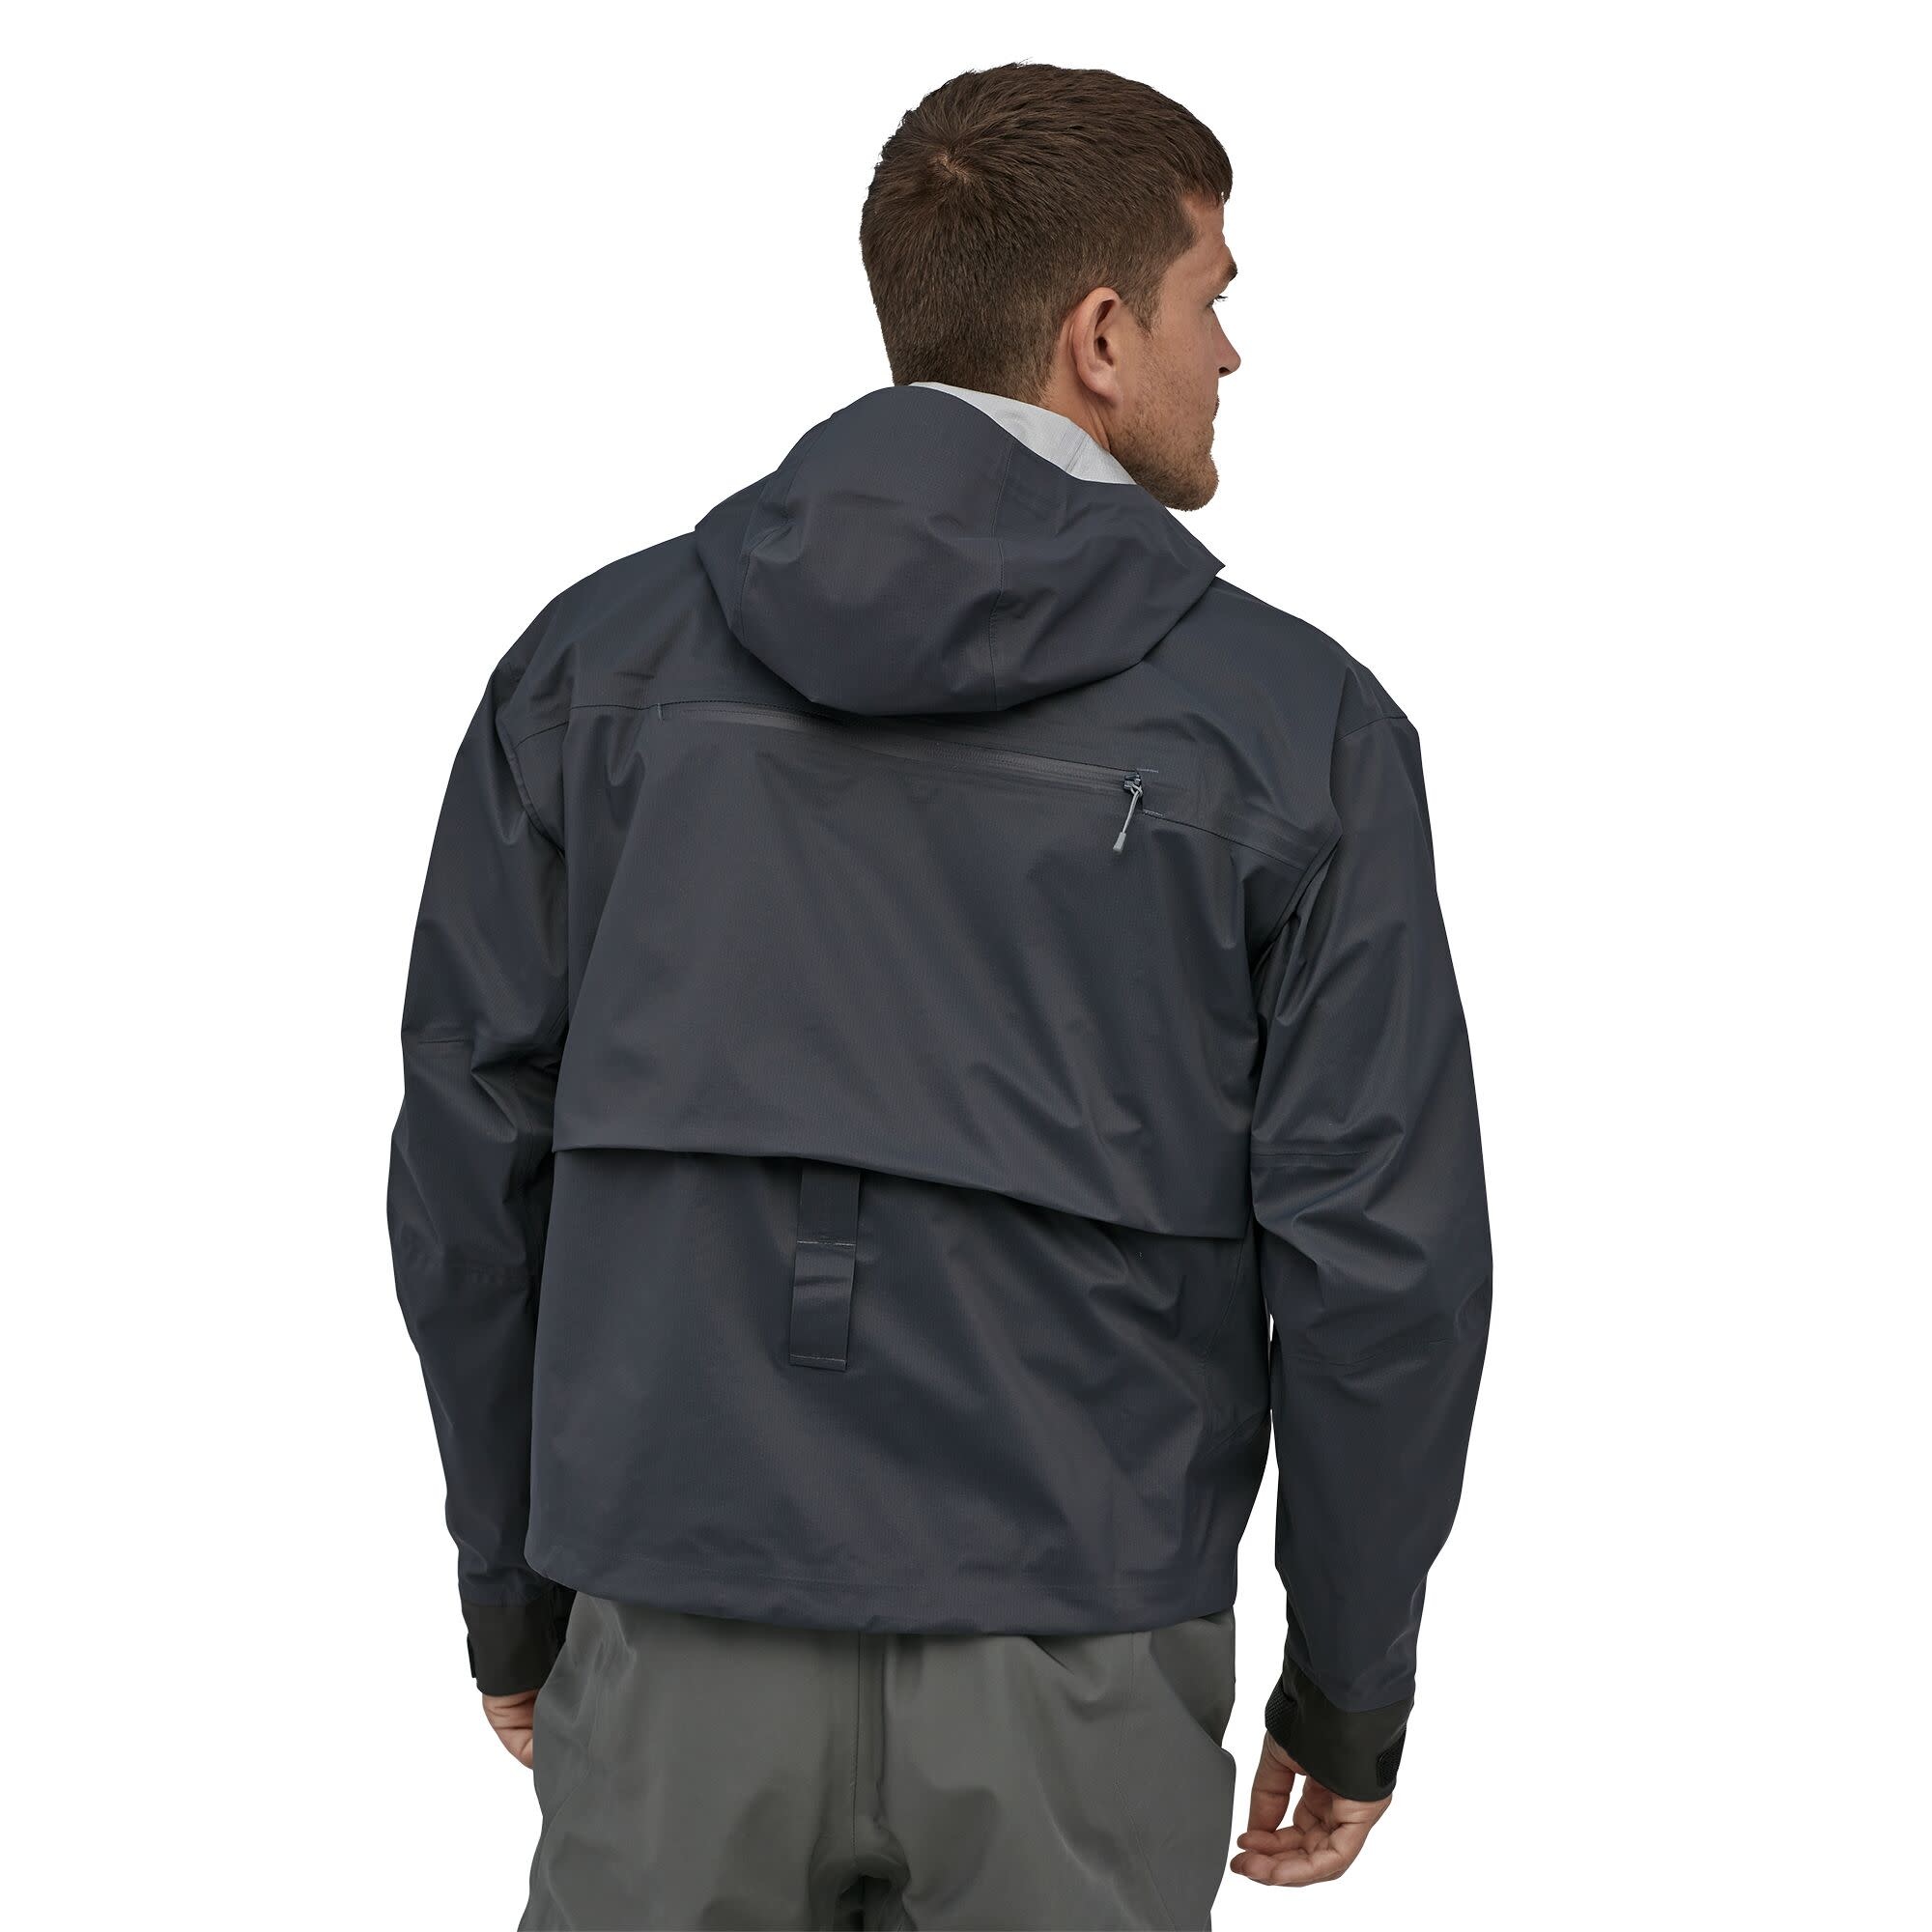 Patagonia SST Jacket-Smolder Blue - Tight Lines Fly Fishing Co.